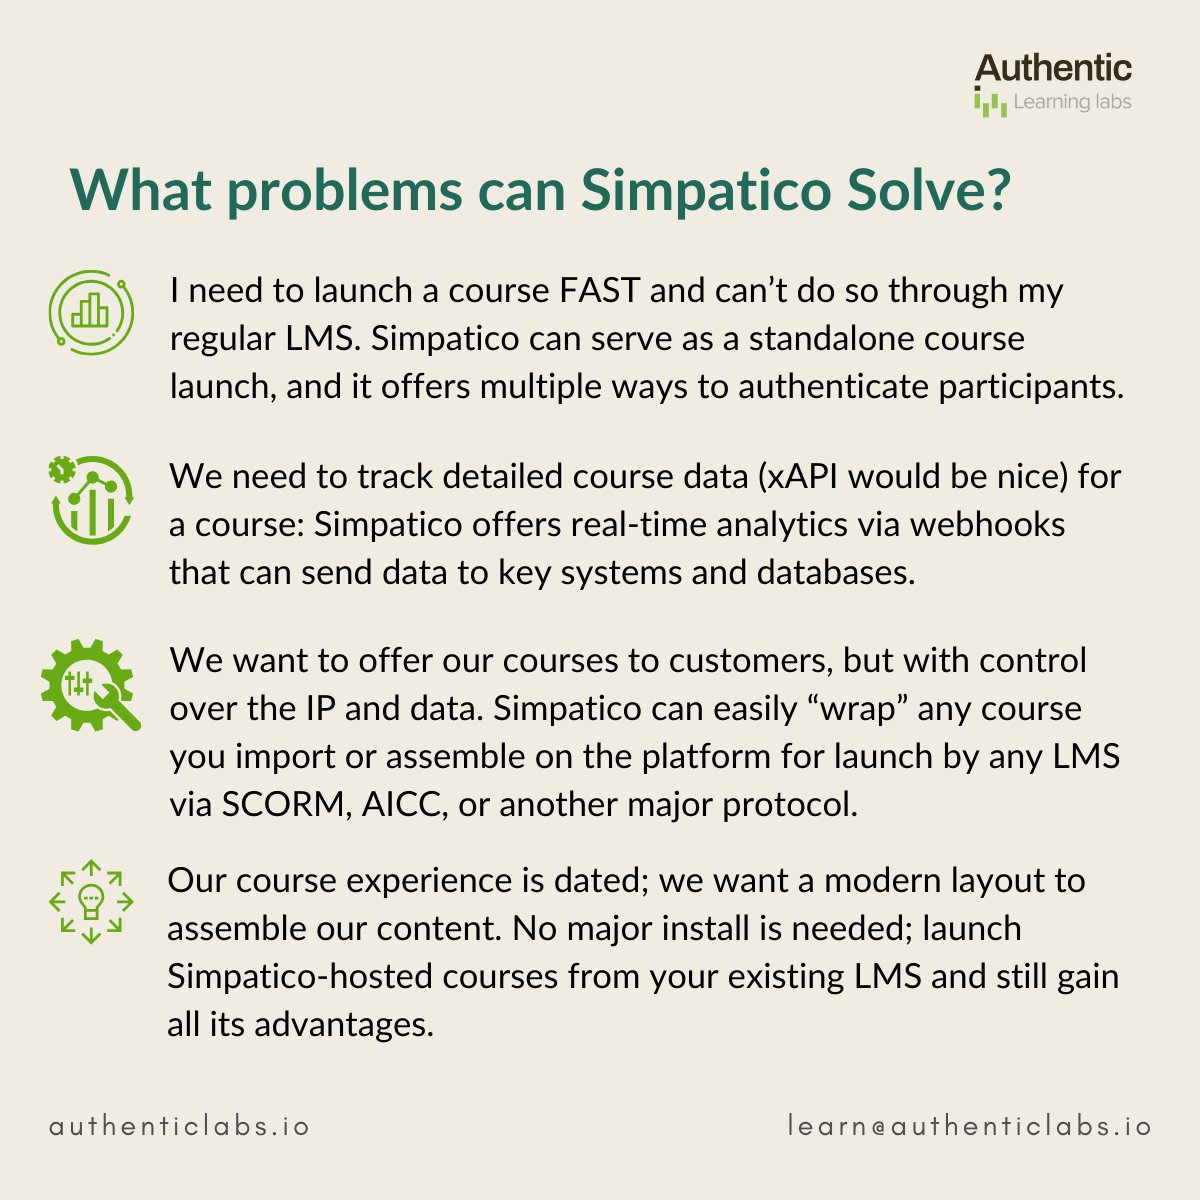 Break away from the shackles of a tedious traditional LMS and see how differently 'Simpatico', our API-centric LMS, approaches integration, flexibility, and scalability.

#authenticlearninglabs #simpatico #lmsbyapi #elearnıng #lmssoftware #lms #learninganddevelopment #edtech